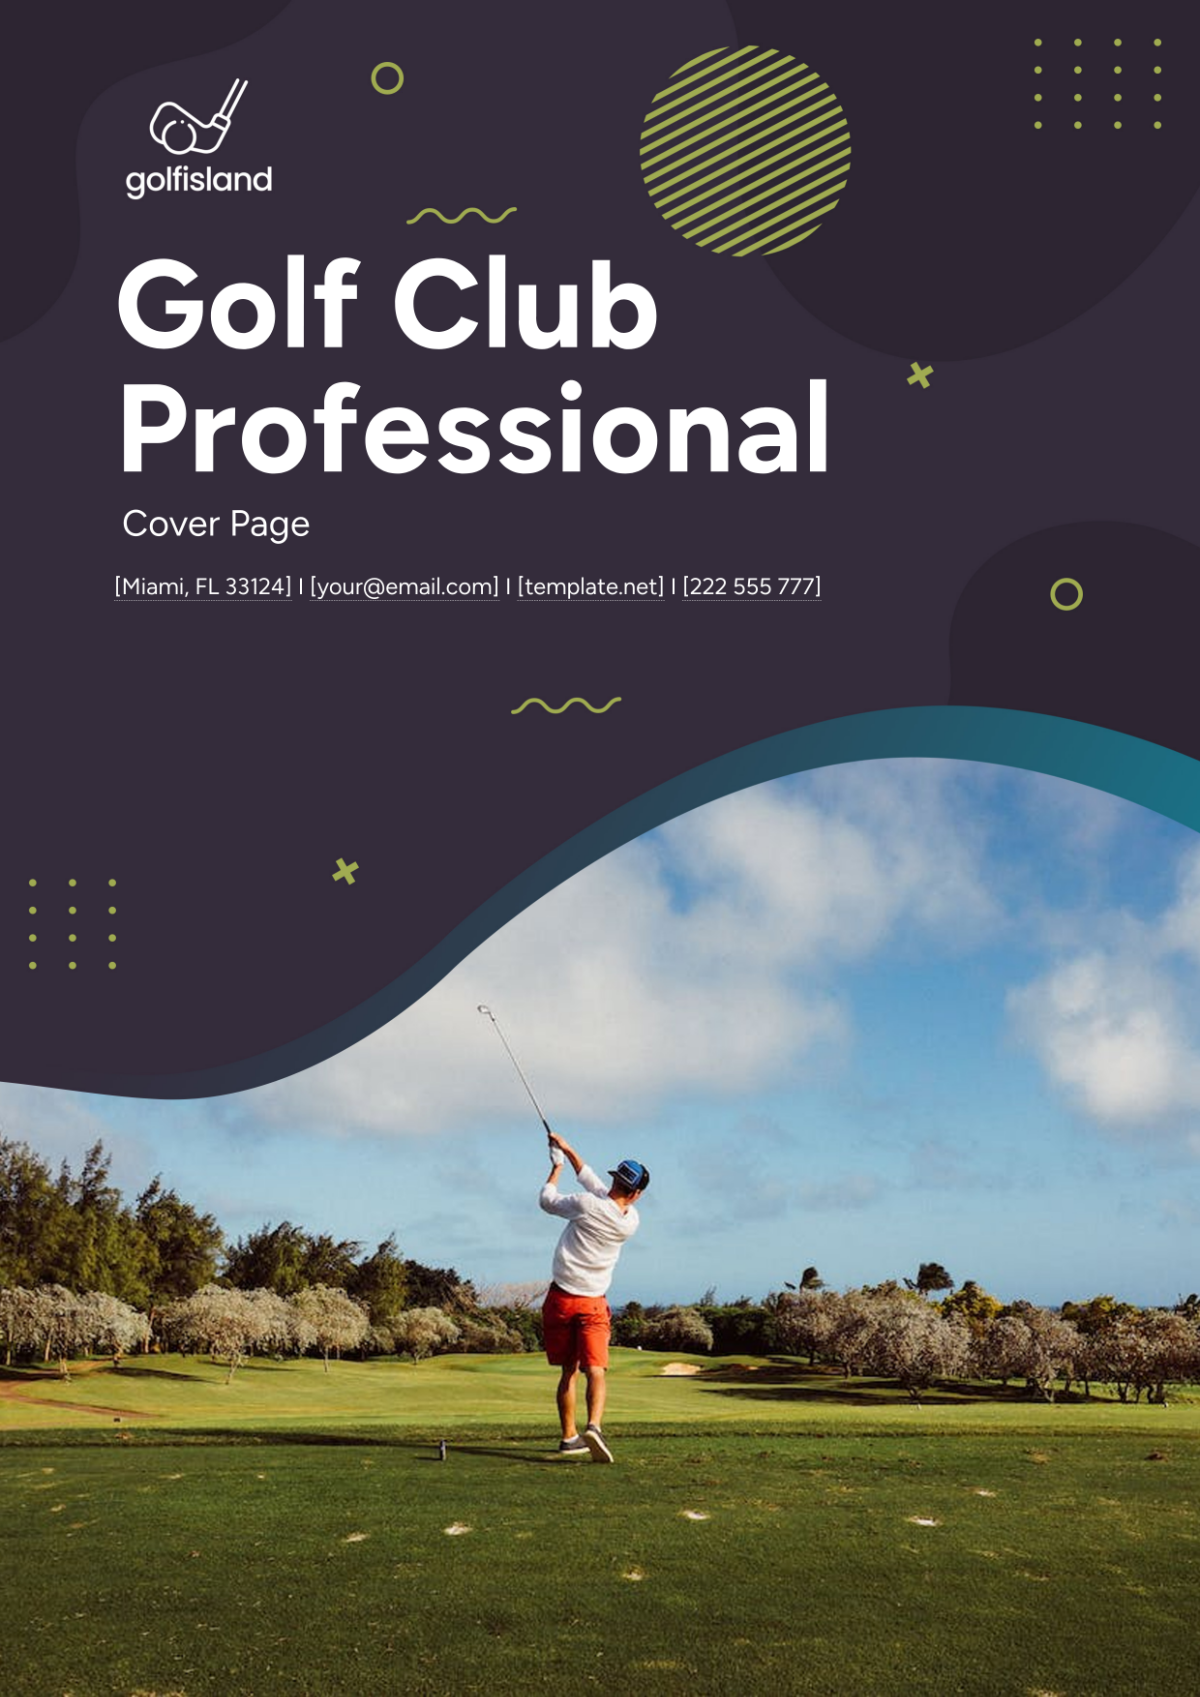 Golf Club Professional Cover Page Template